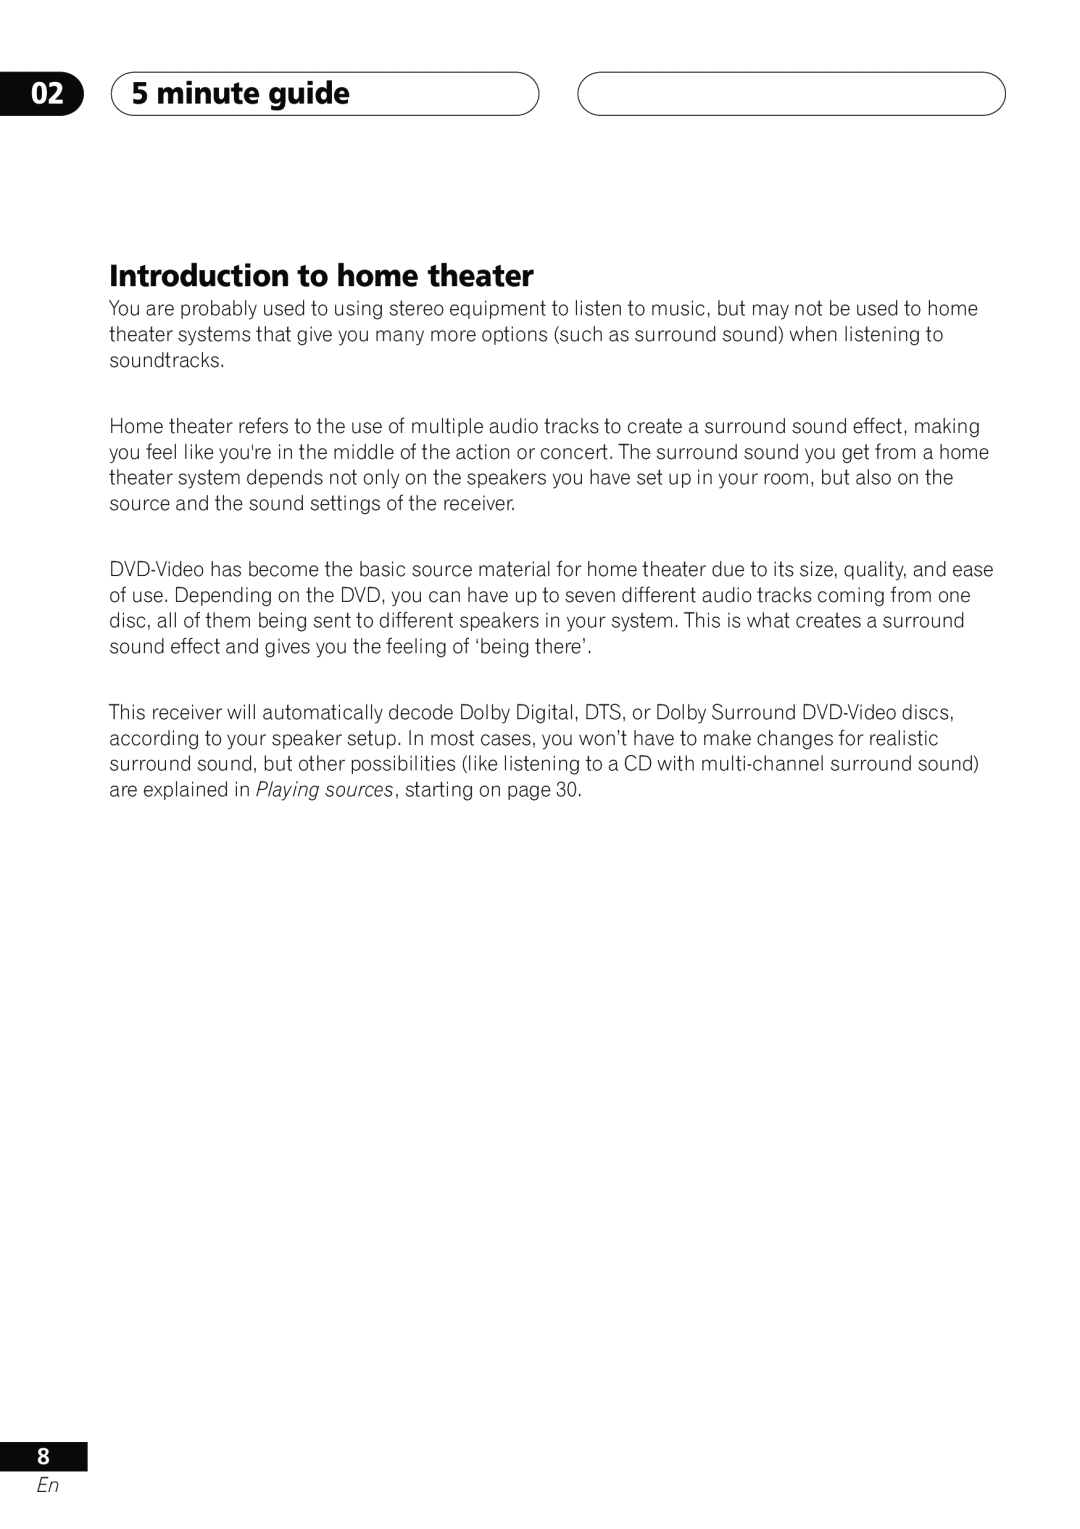 Pioneer vsx-d412 manual 02 5 minute guide Introduction to home theater 